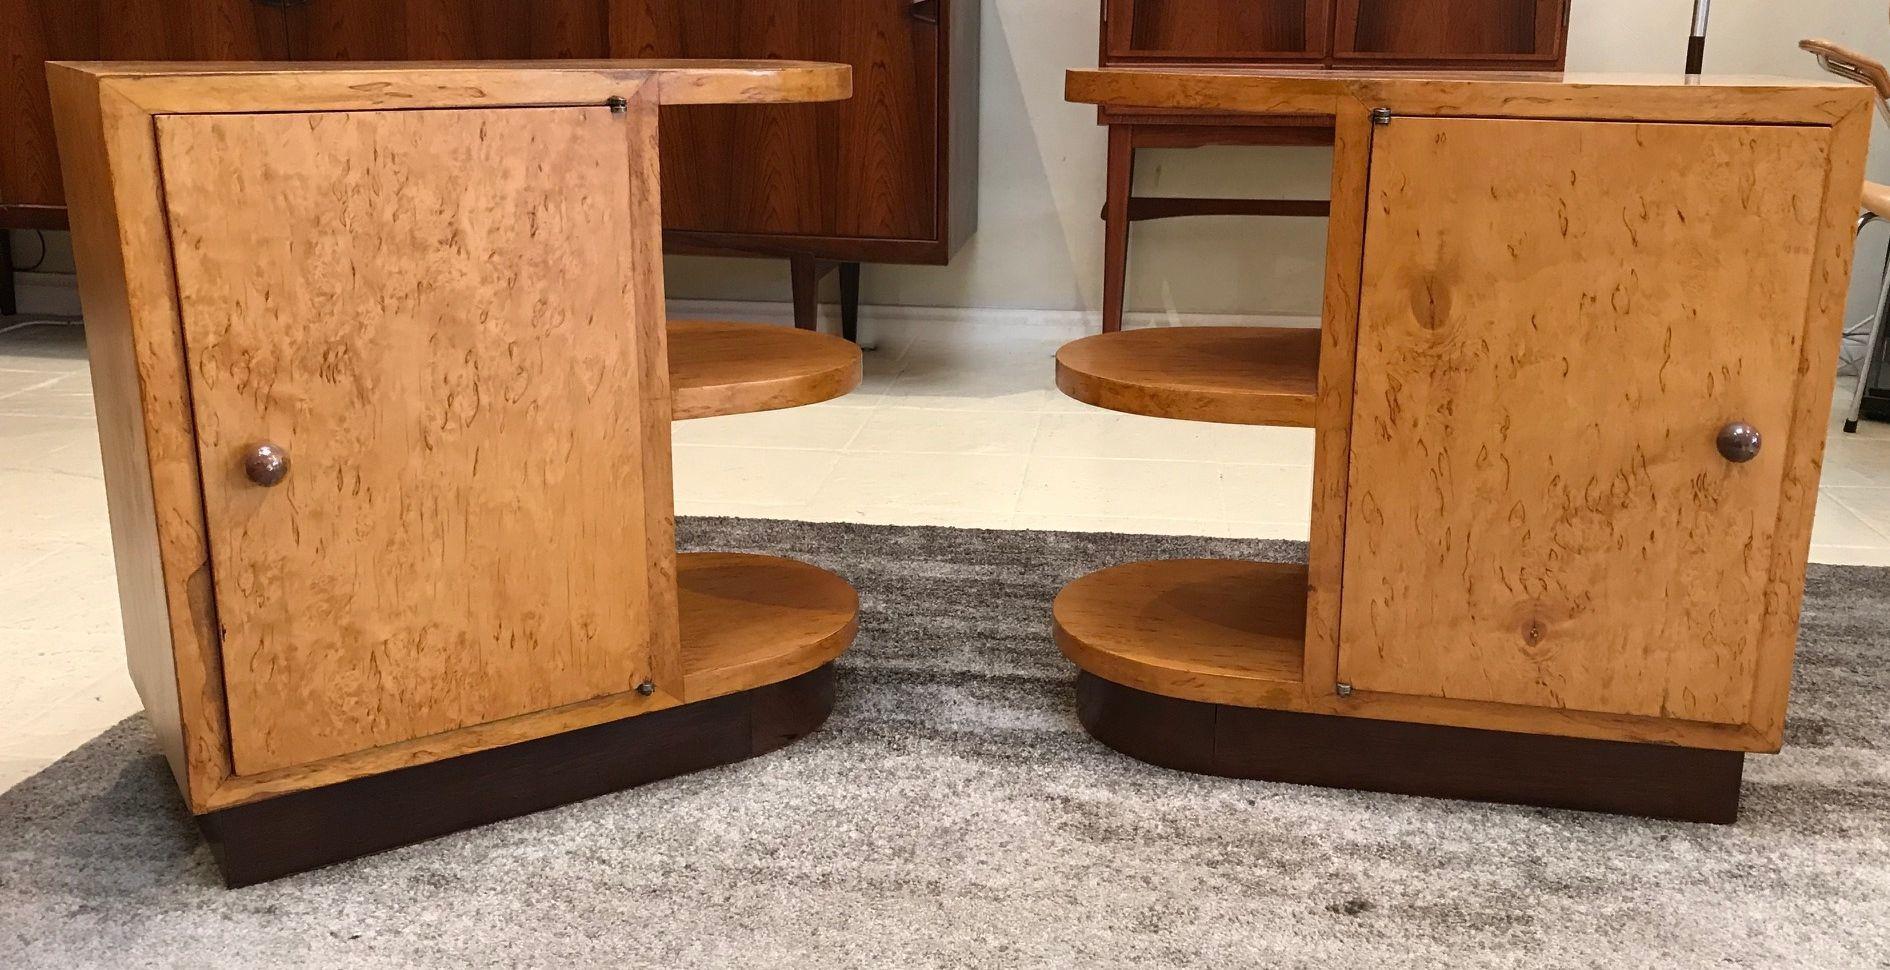 Pair of Swedish modernist Art Deco Karelian birch and palisander bedside cabinets. Curved cantilevered shelving and geometric straight line cabinets resting on a curved inverted plinth. The interior is lined with palisander and has a single shelf.